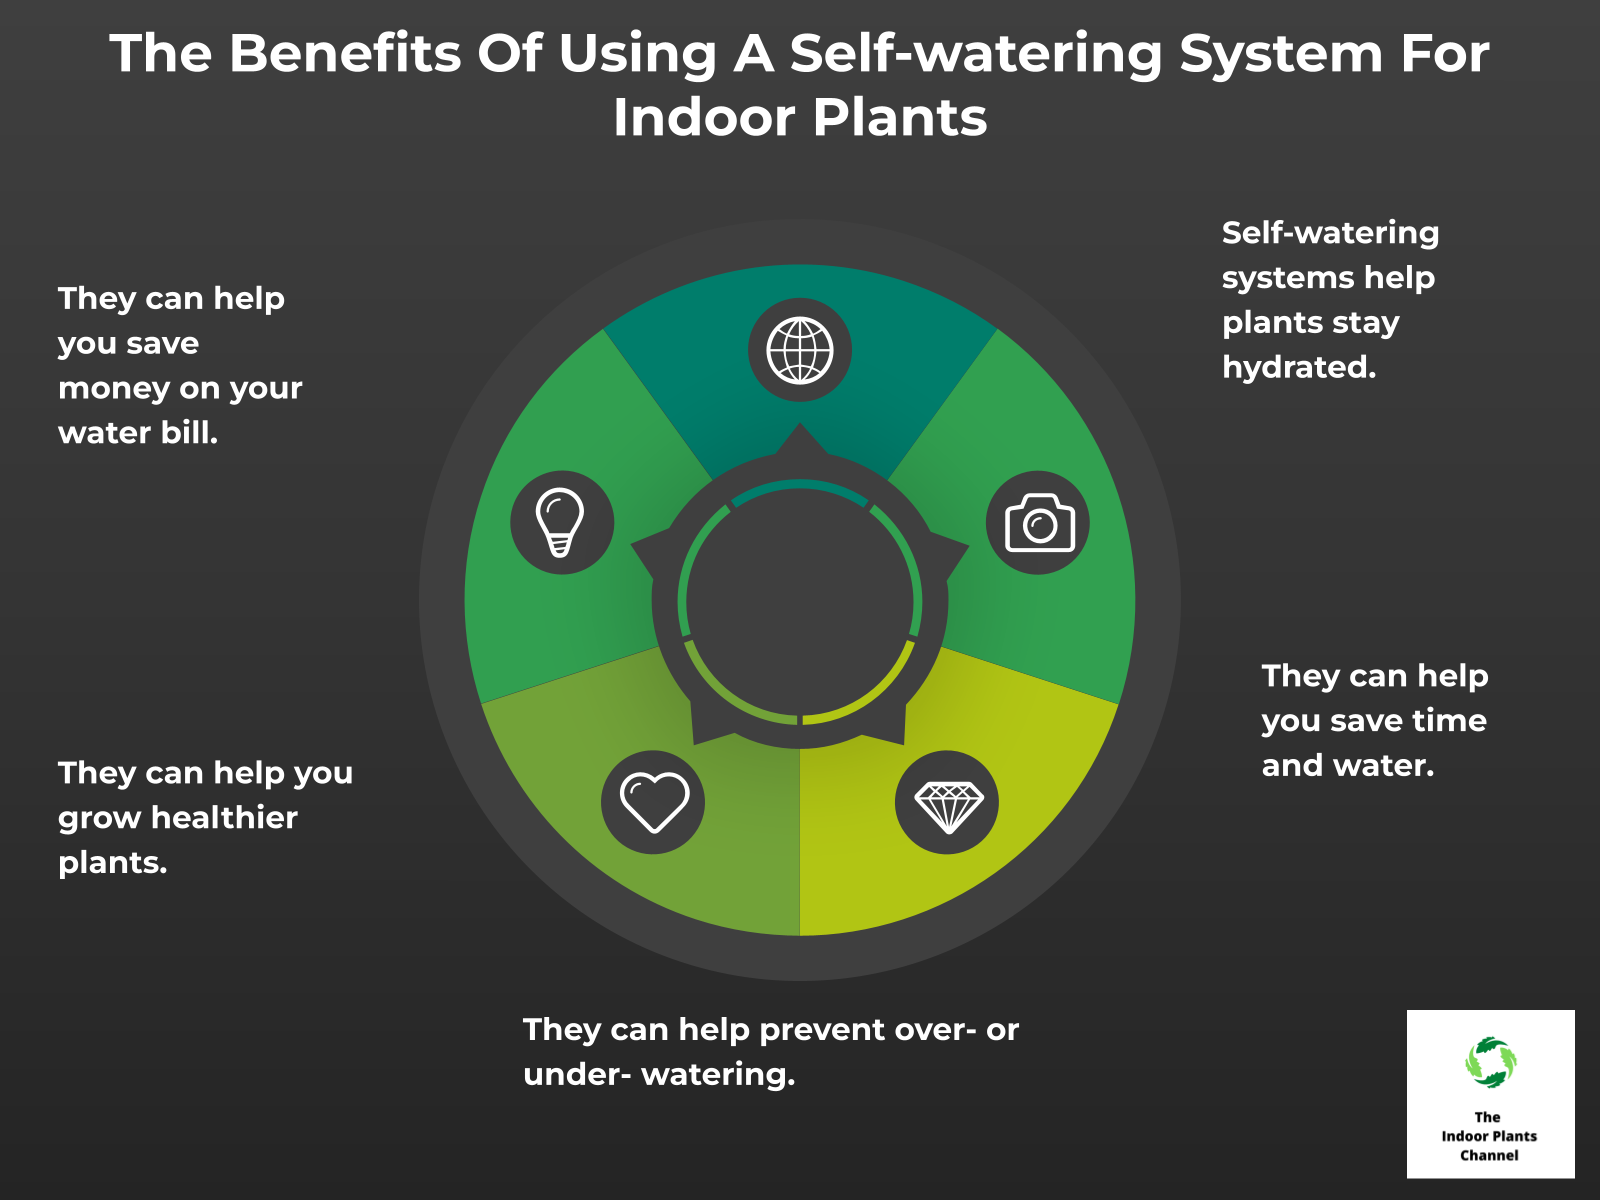 INFOGRAPHIC: The Benefits of Using a Self-Watering System for Indoor Plants